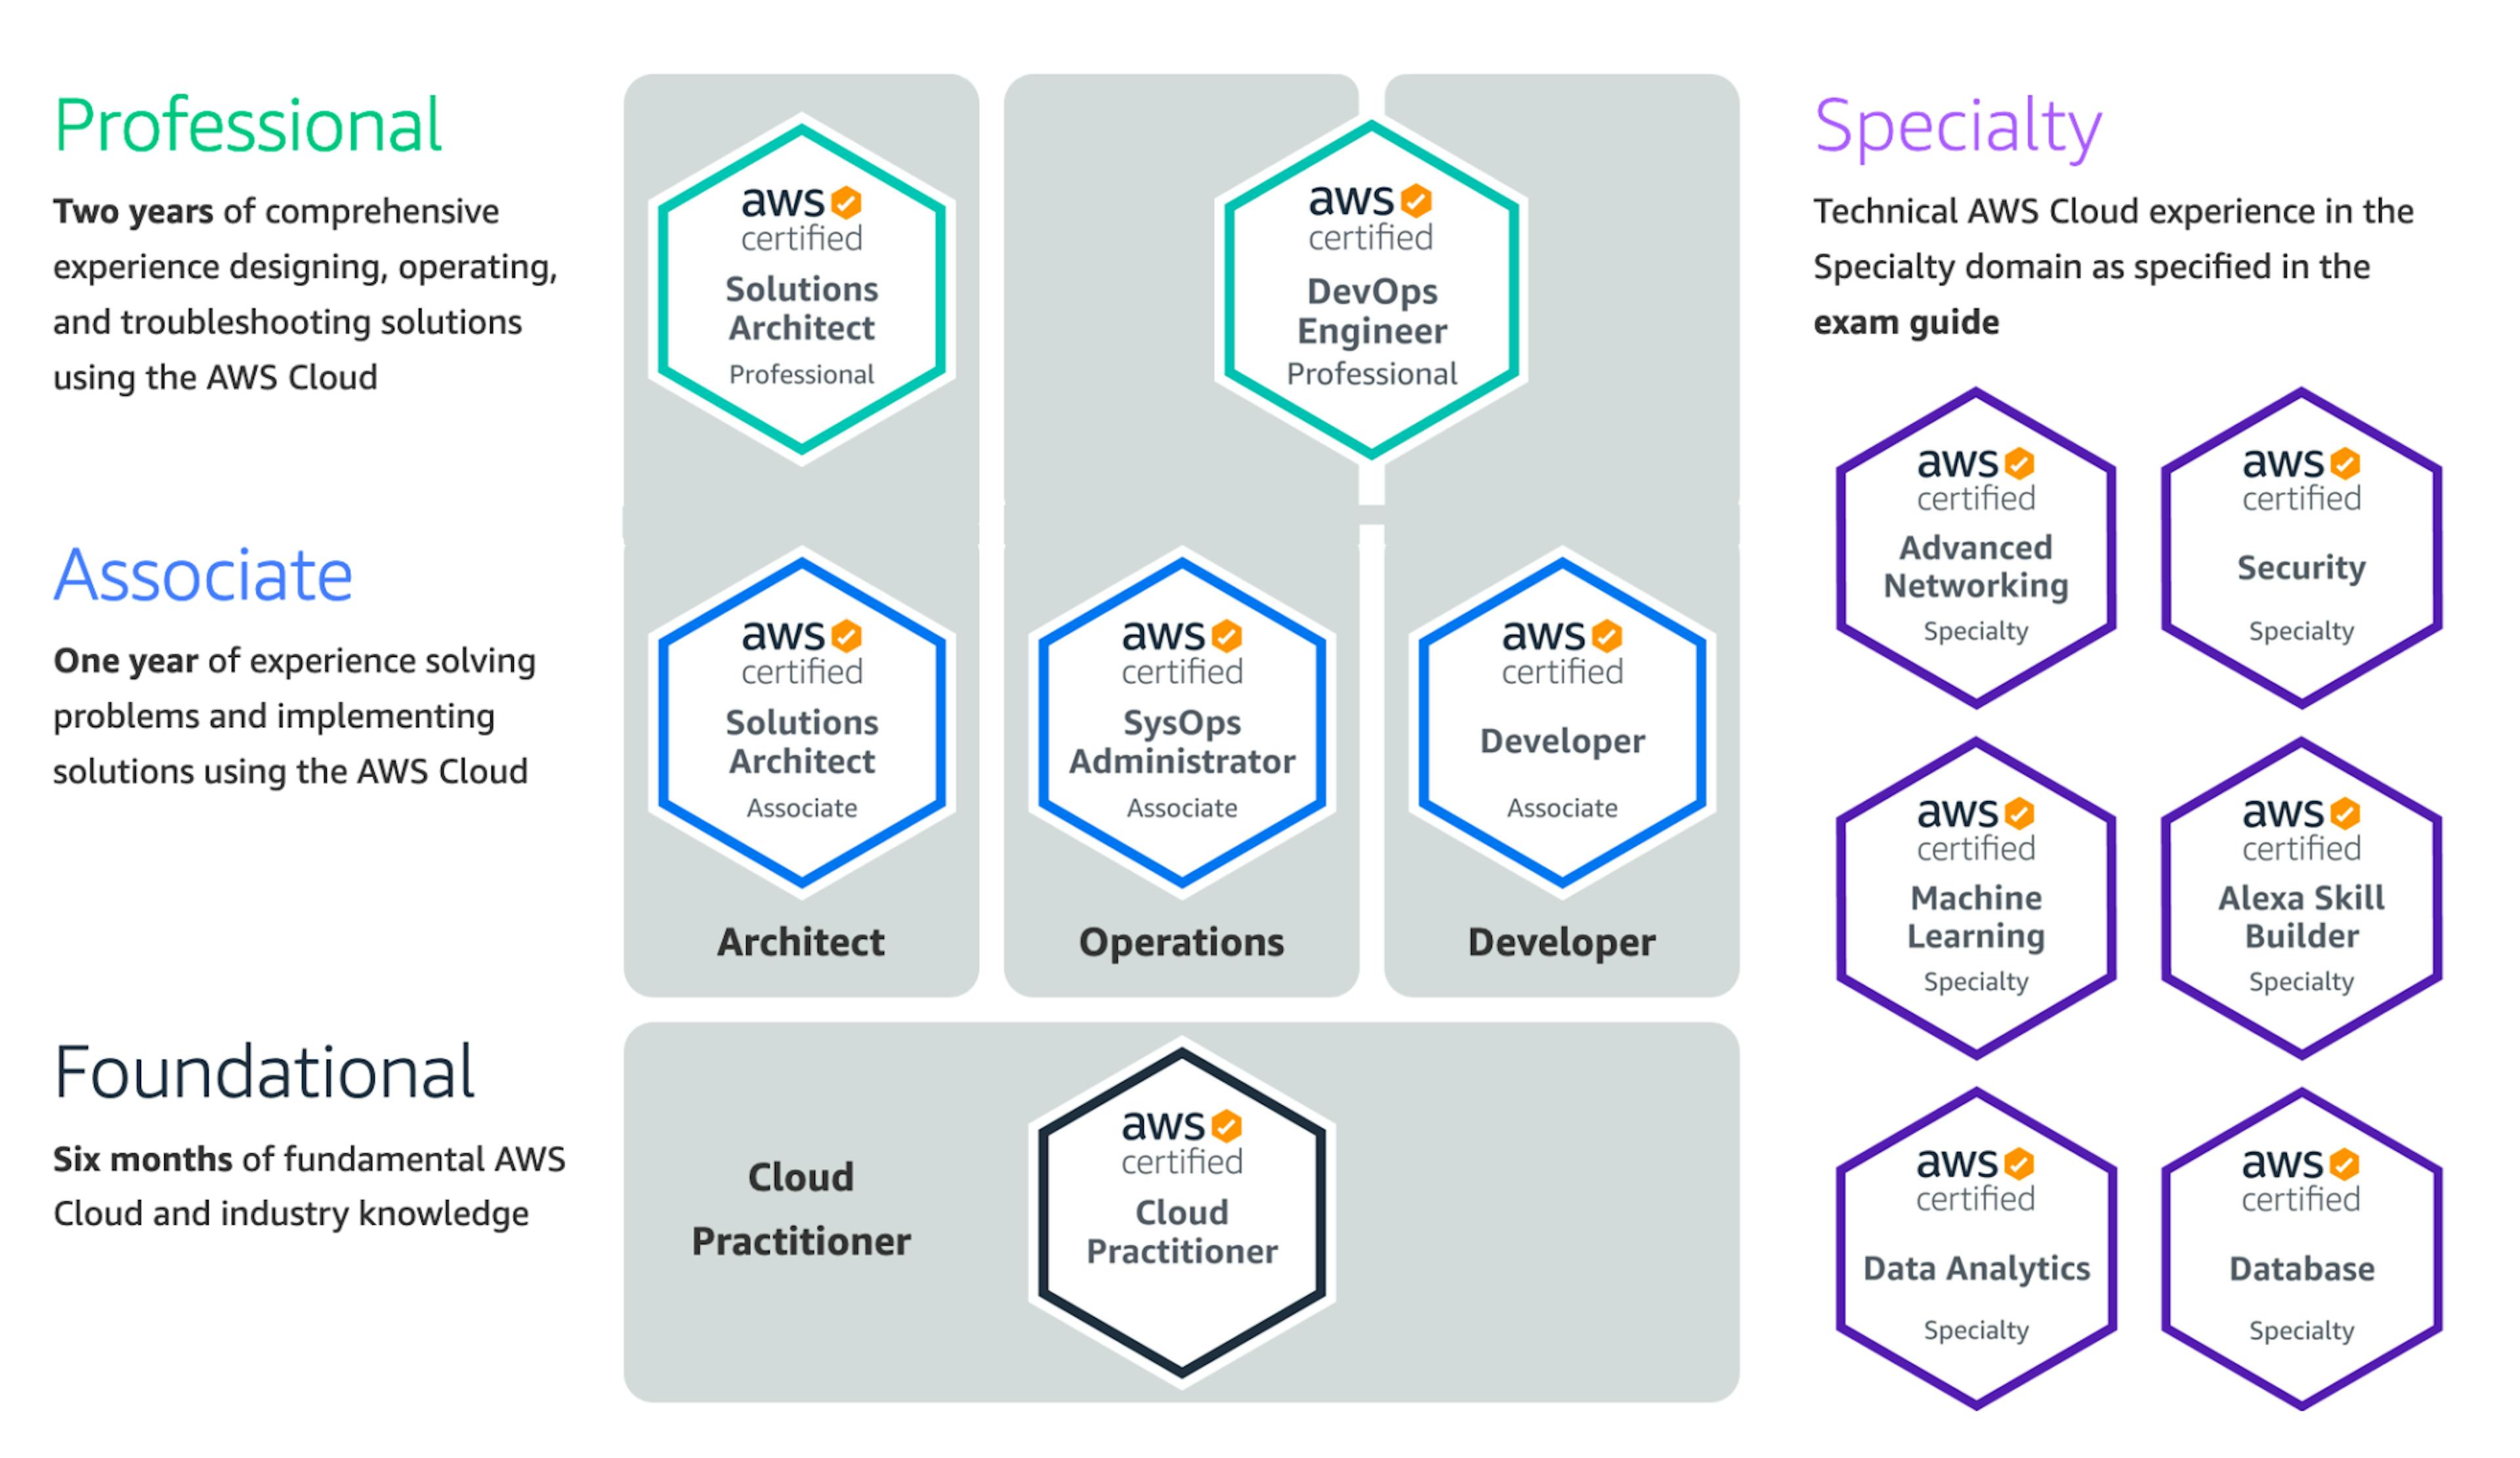 Image 1- AWS Certification map